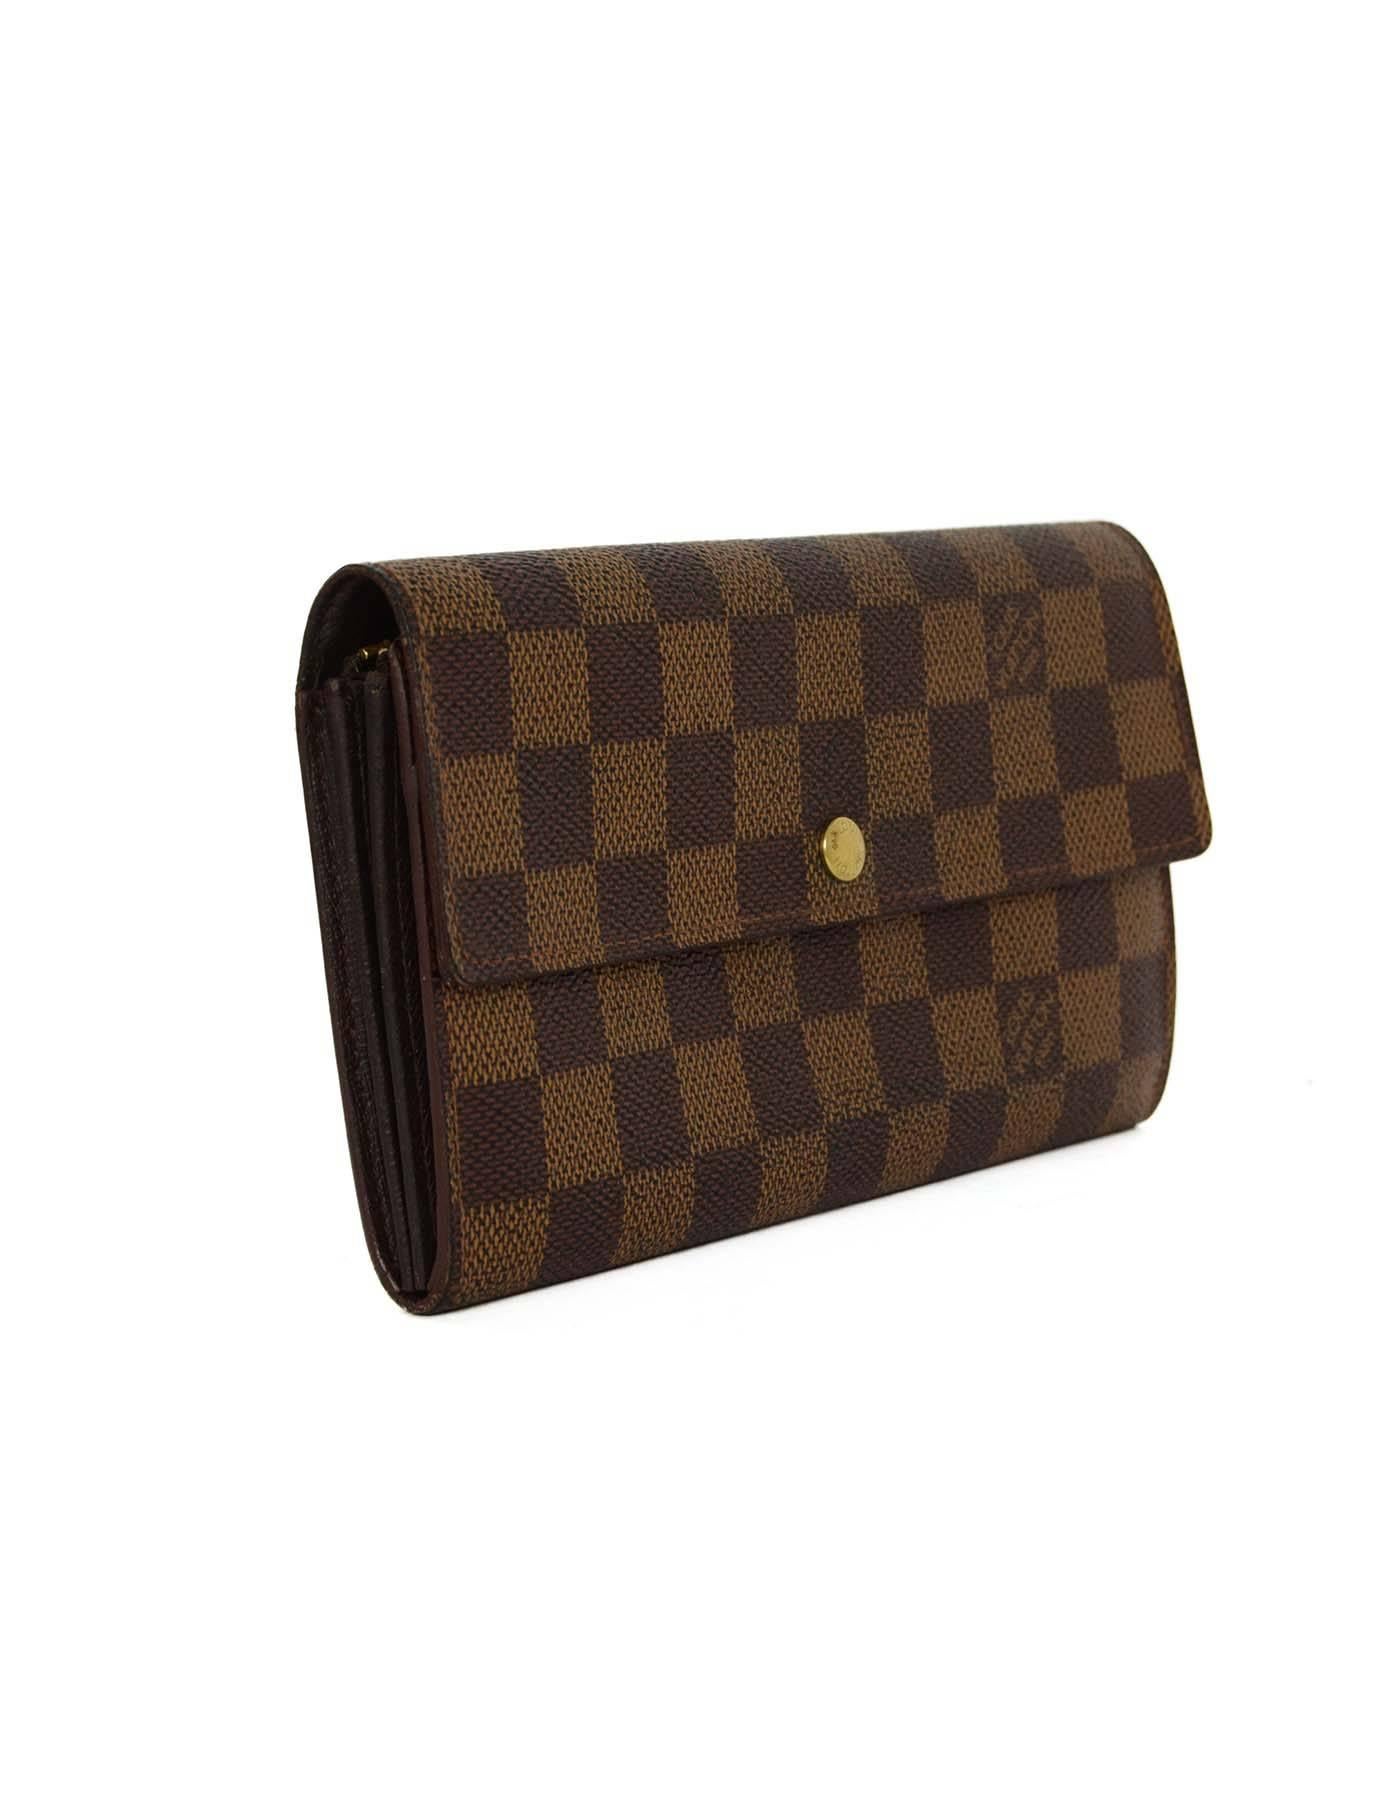 Louis Vuitton Vintage '97 Damier 'Sarah' Wallet 
Made In: Spain
Year of Production: 1997
Color: Brown
Hardware: Goldtone
Materials: Coated canvas
Lining: Brown coated canvas
Closure/Opening: Flap top with snap button closure
Exterior